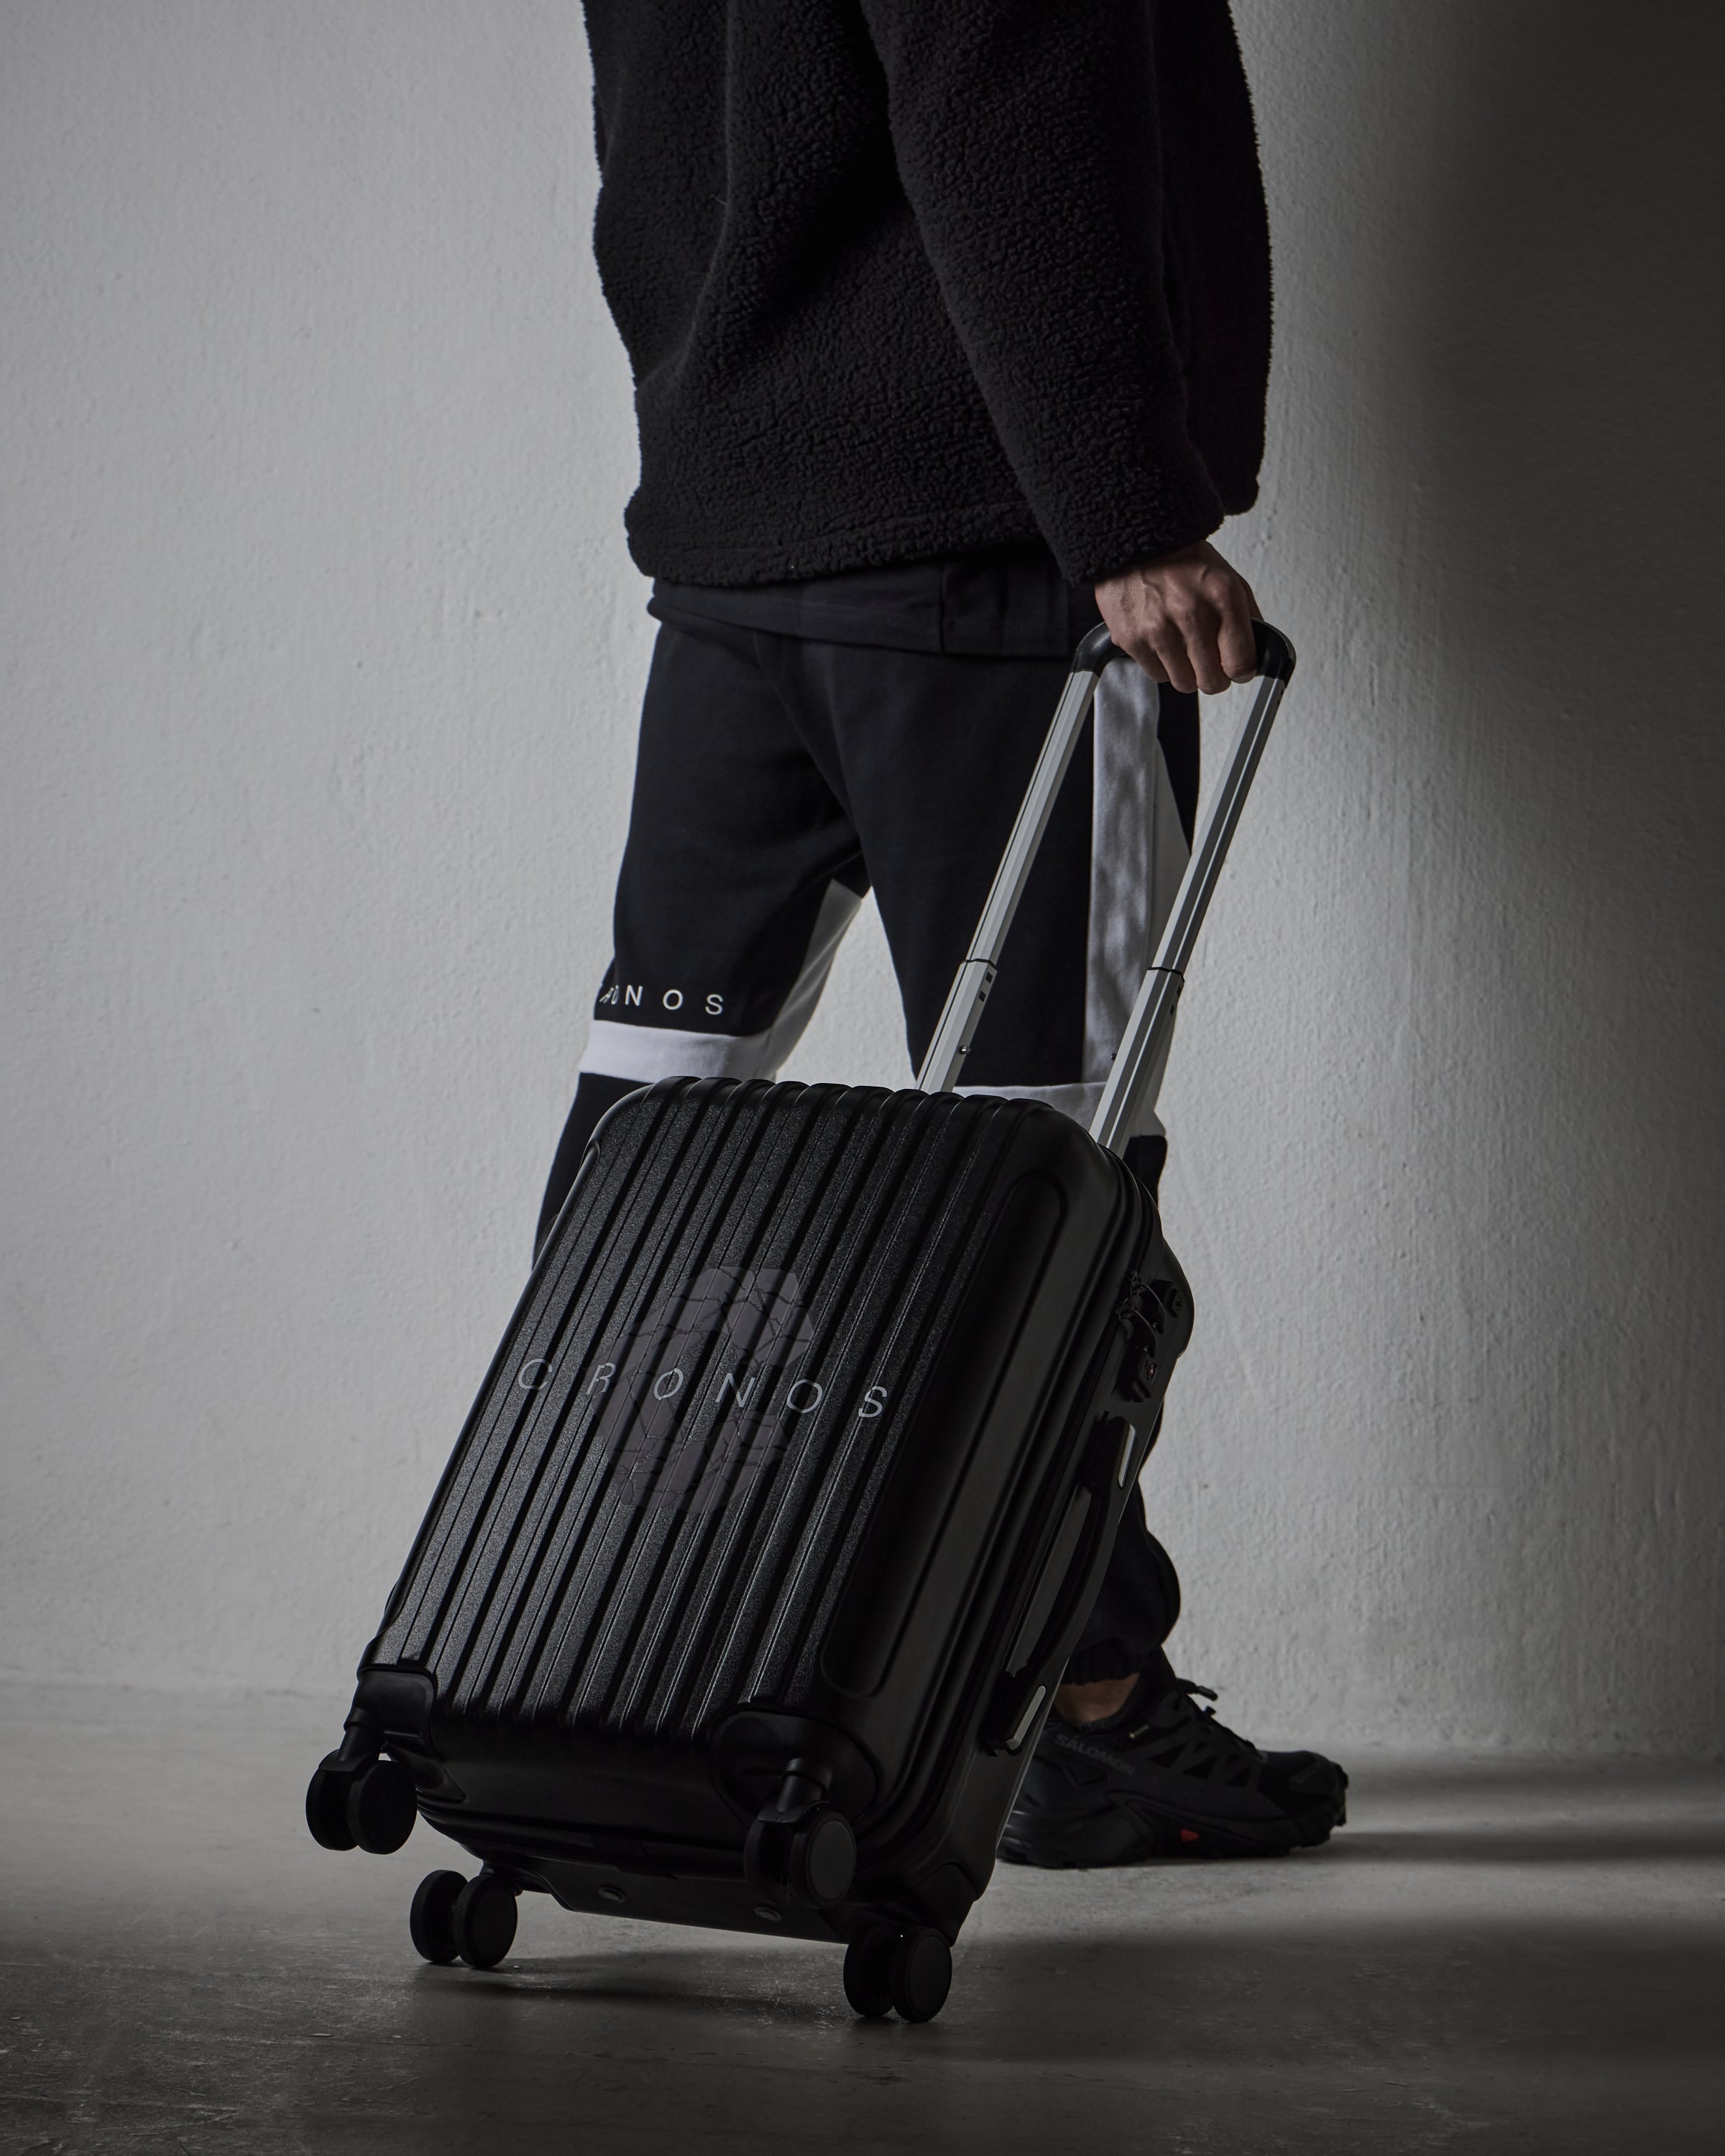 CRONOS LITE SUITCASE – クロノス CRONOS Official Store